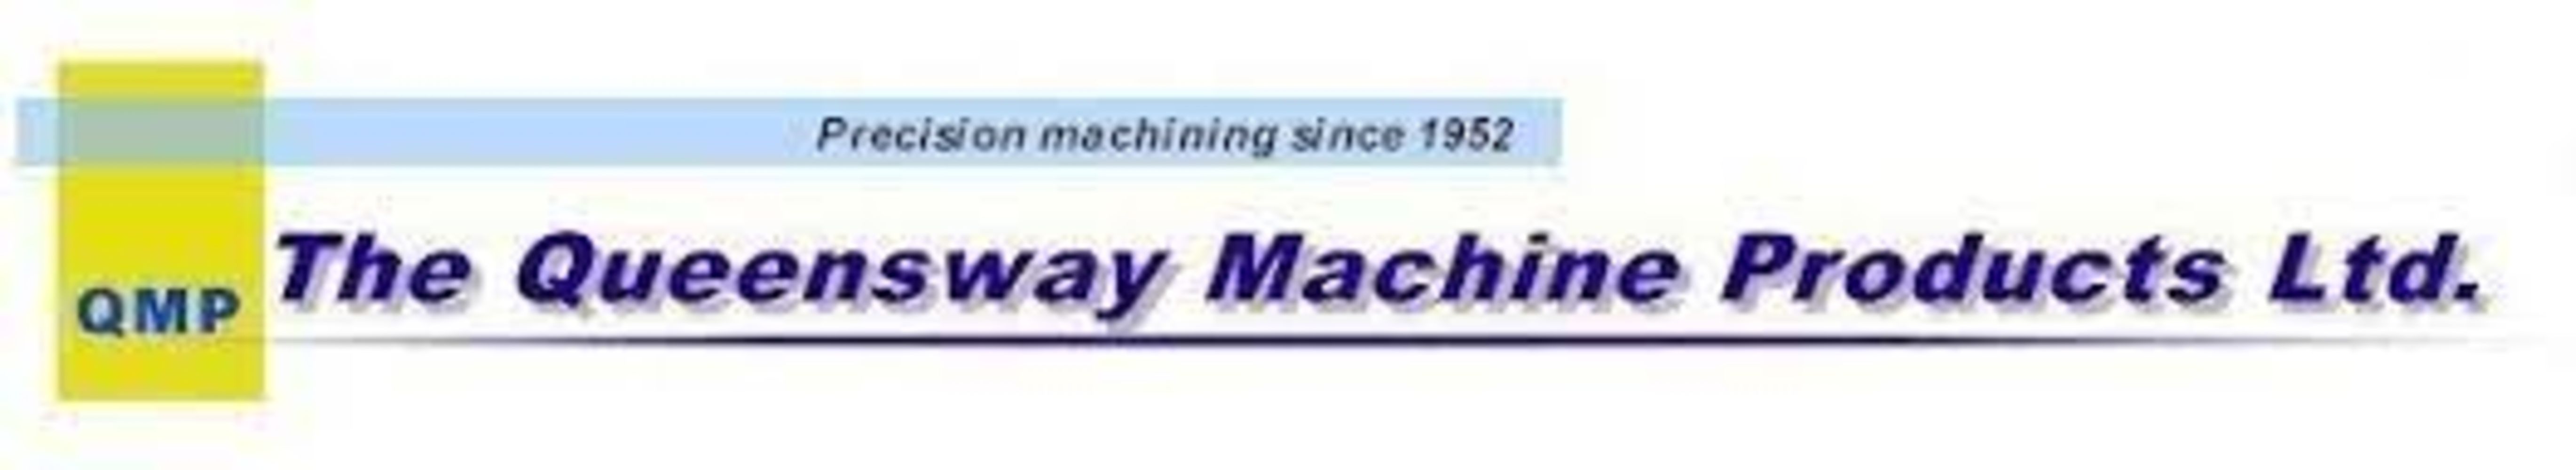 Day 1 - The Queensway Machine Products Ltd.